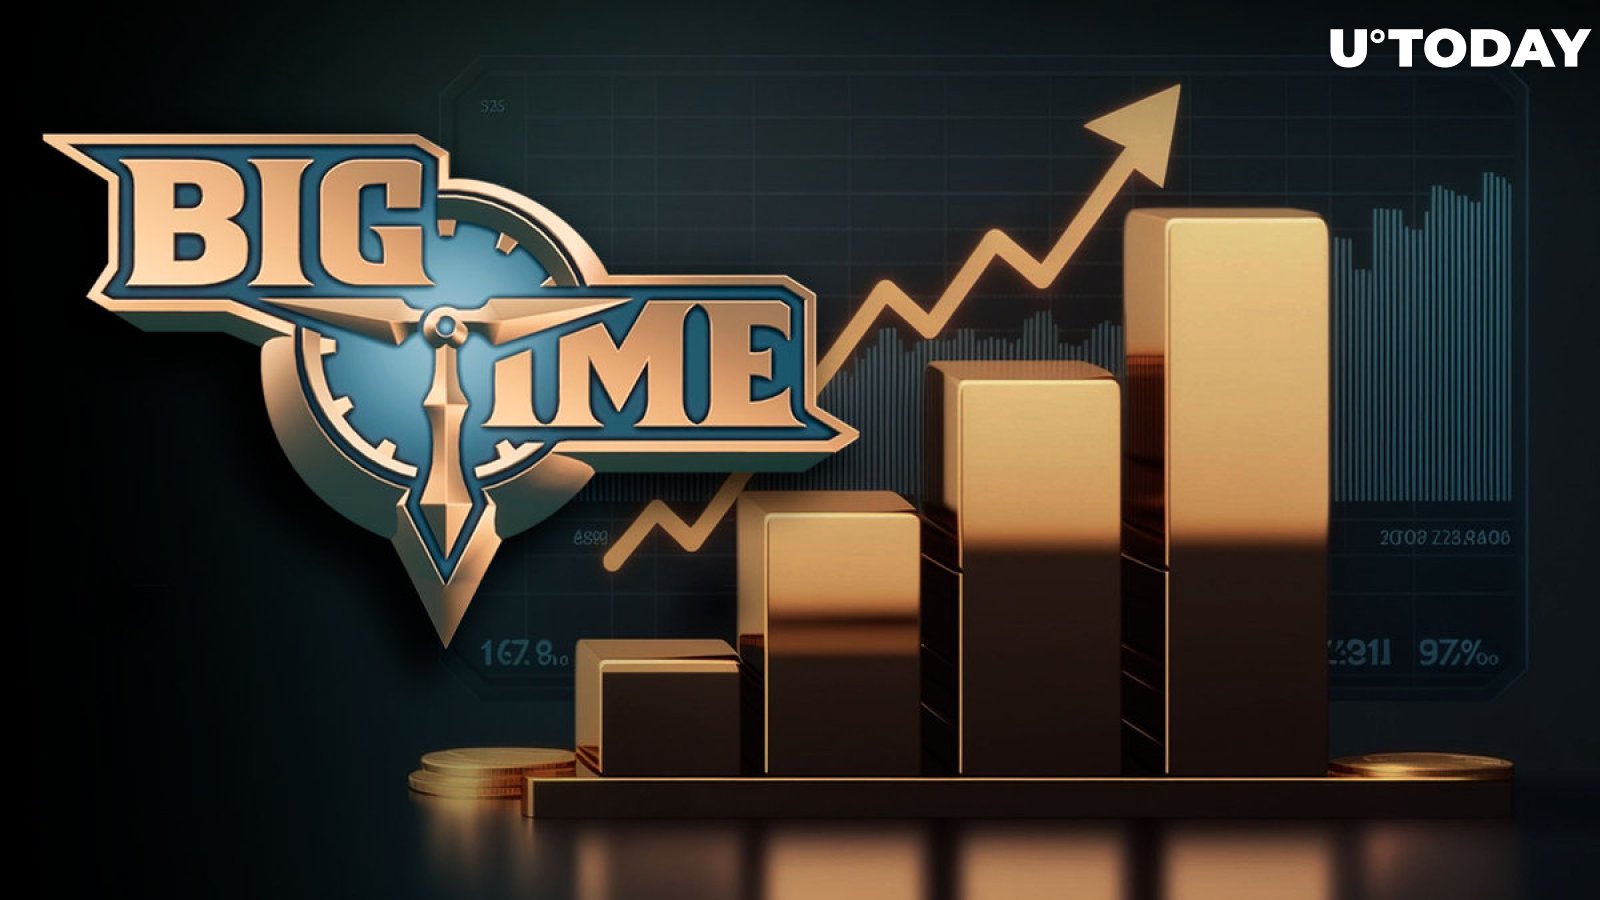 Big Time Review – Play, Earn, and Invest in BIGTIME Crypto